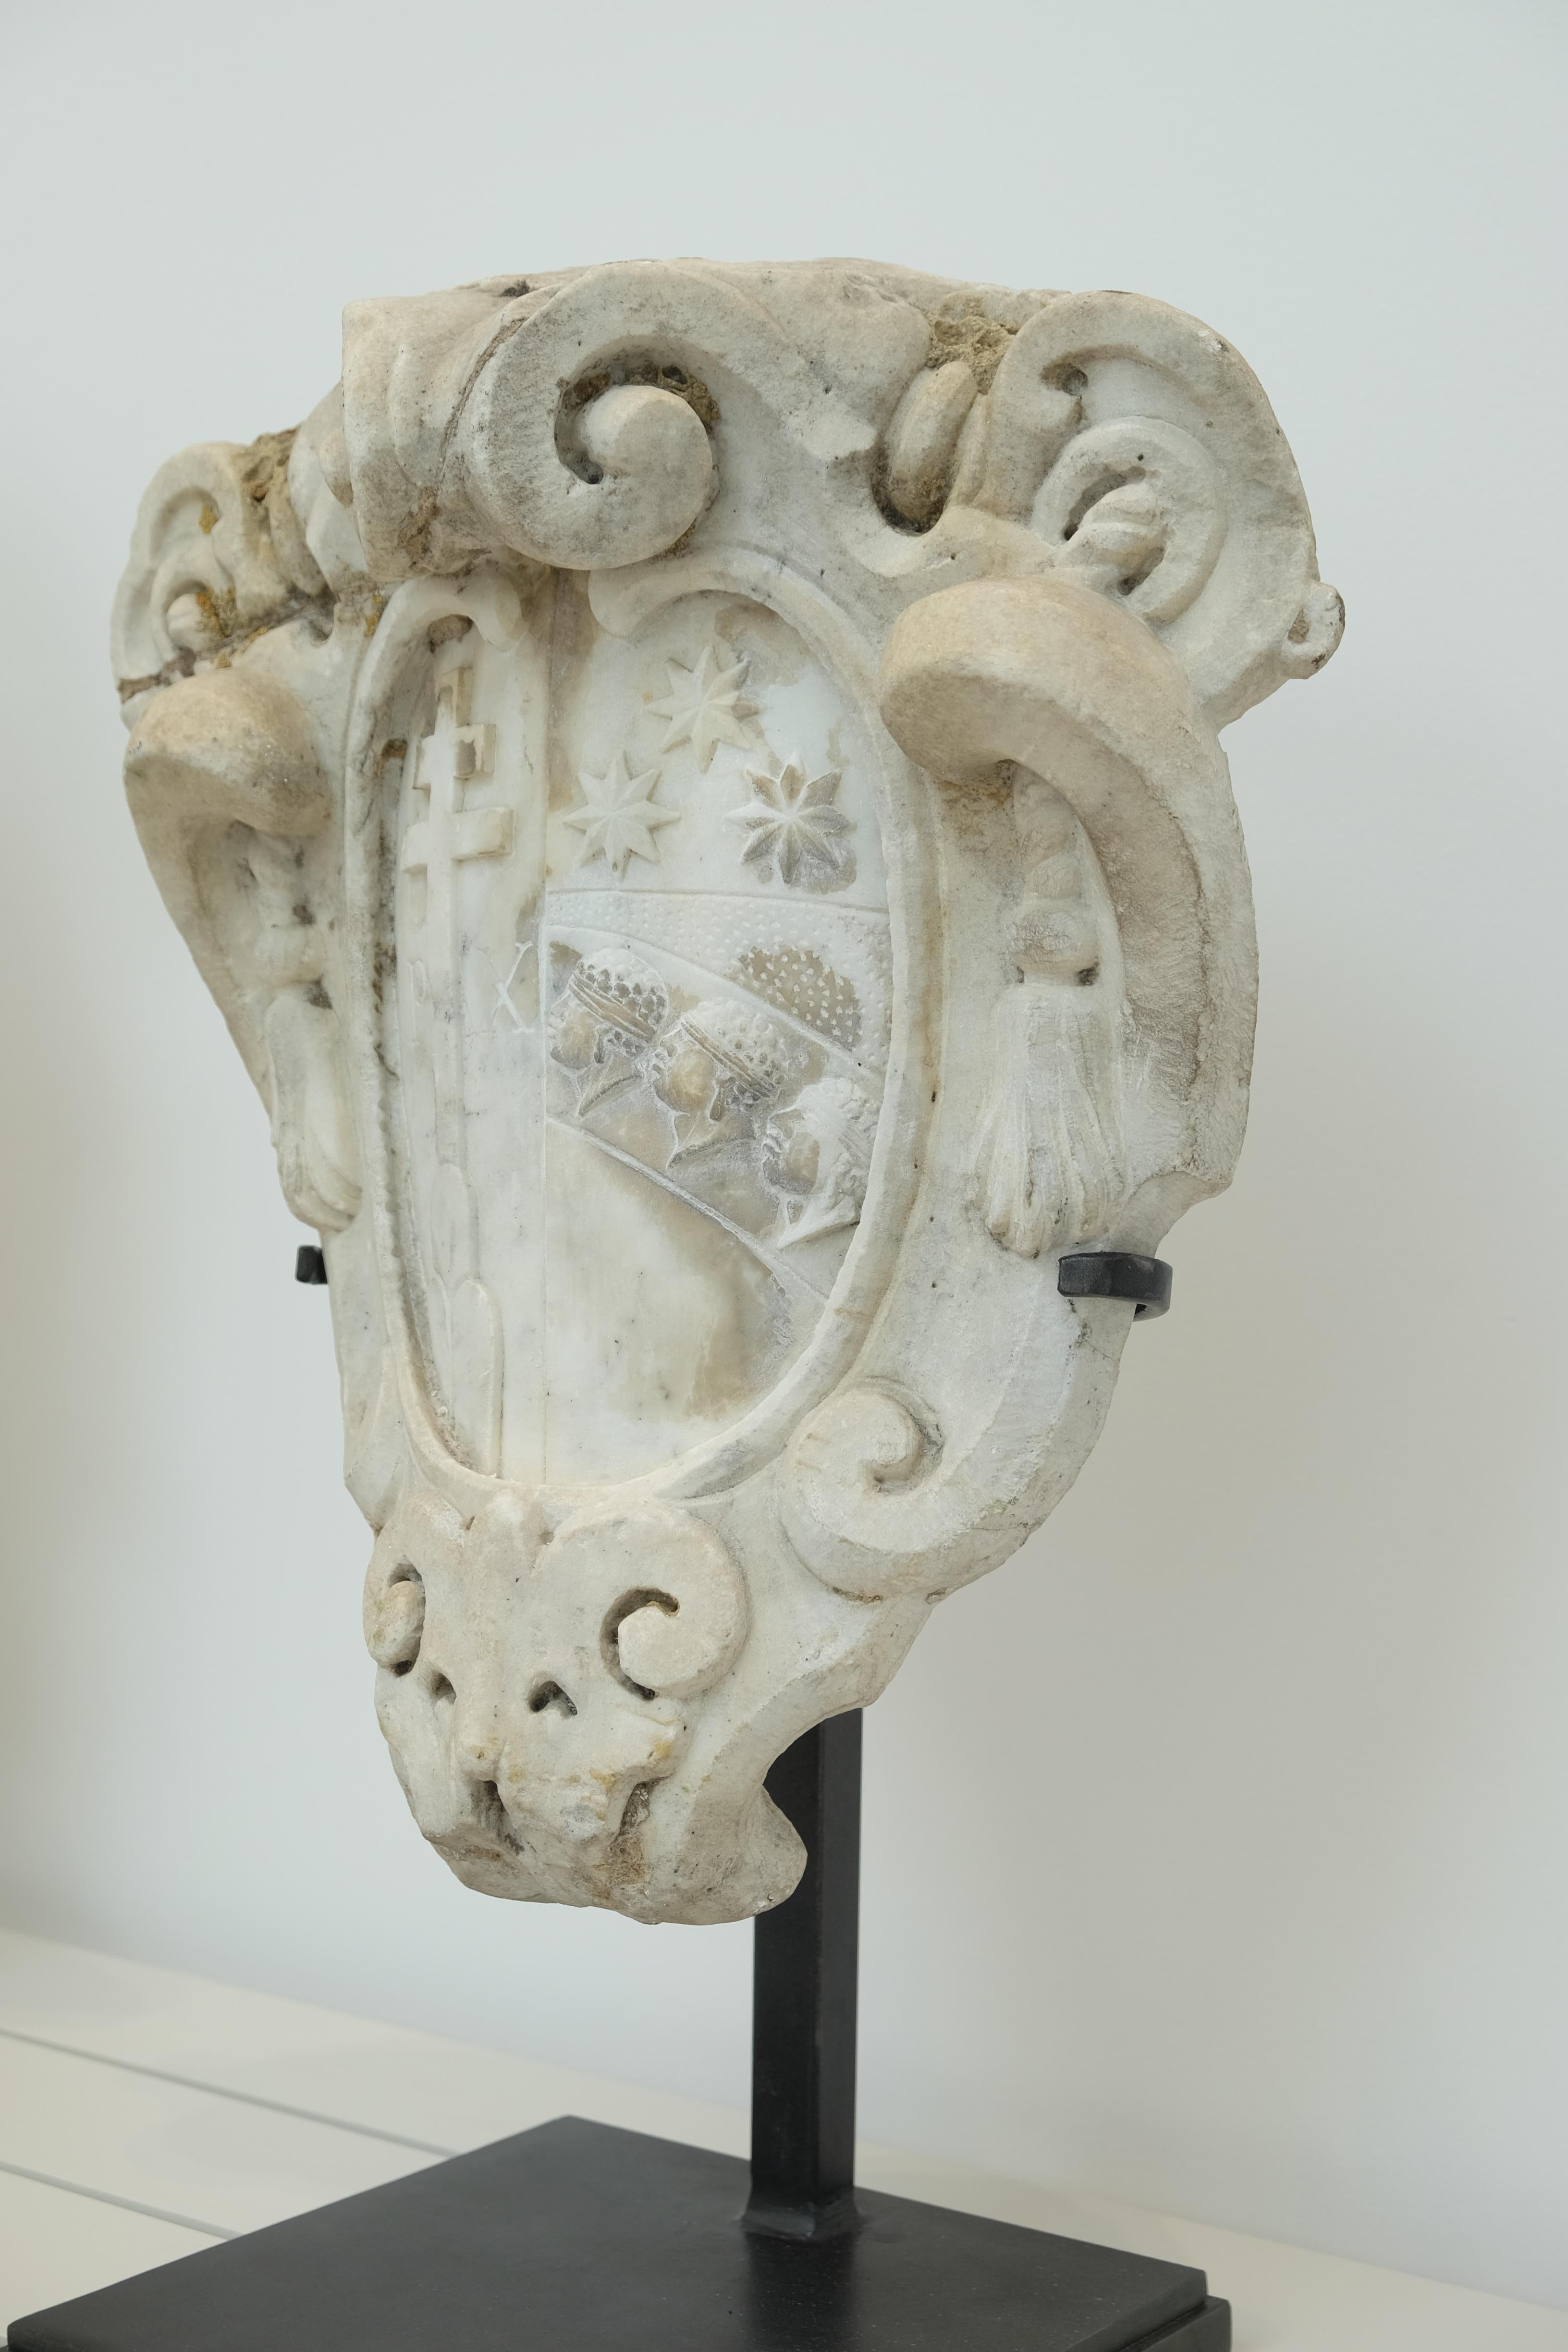 Carved Florentine Marble Stemma 'Cartouche' on Steel Stand-Pucci Family, 16th Century